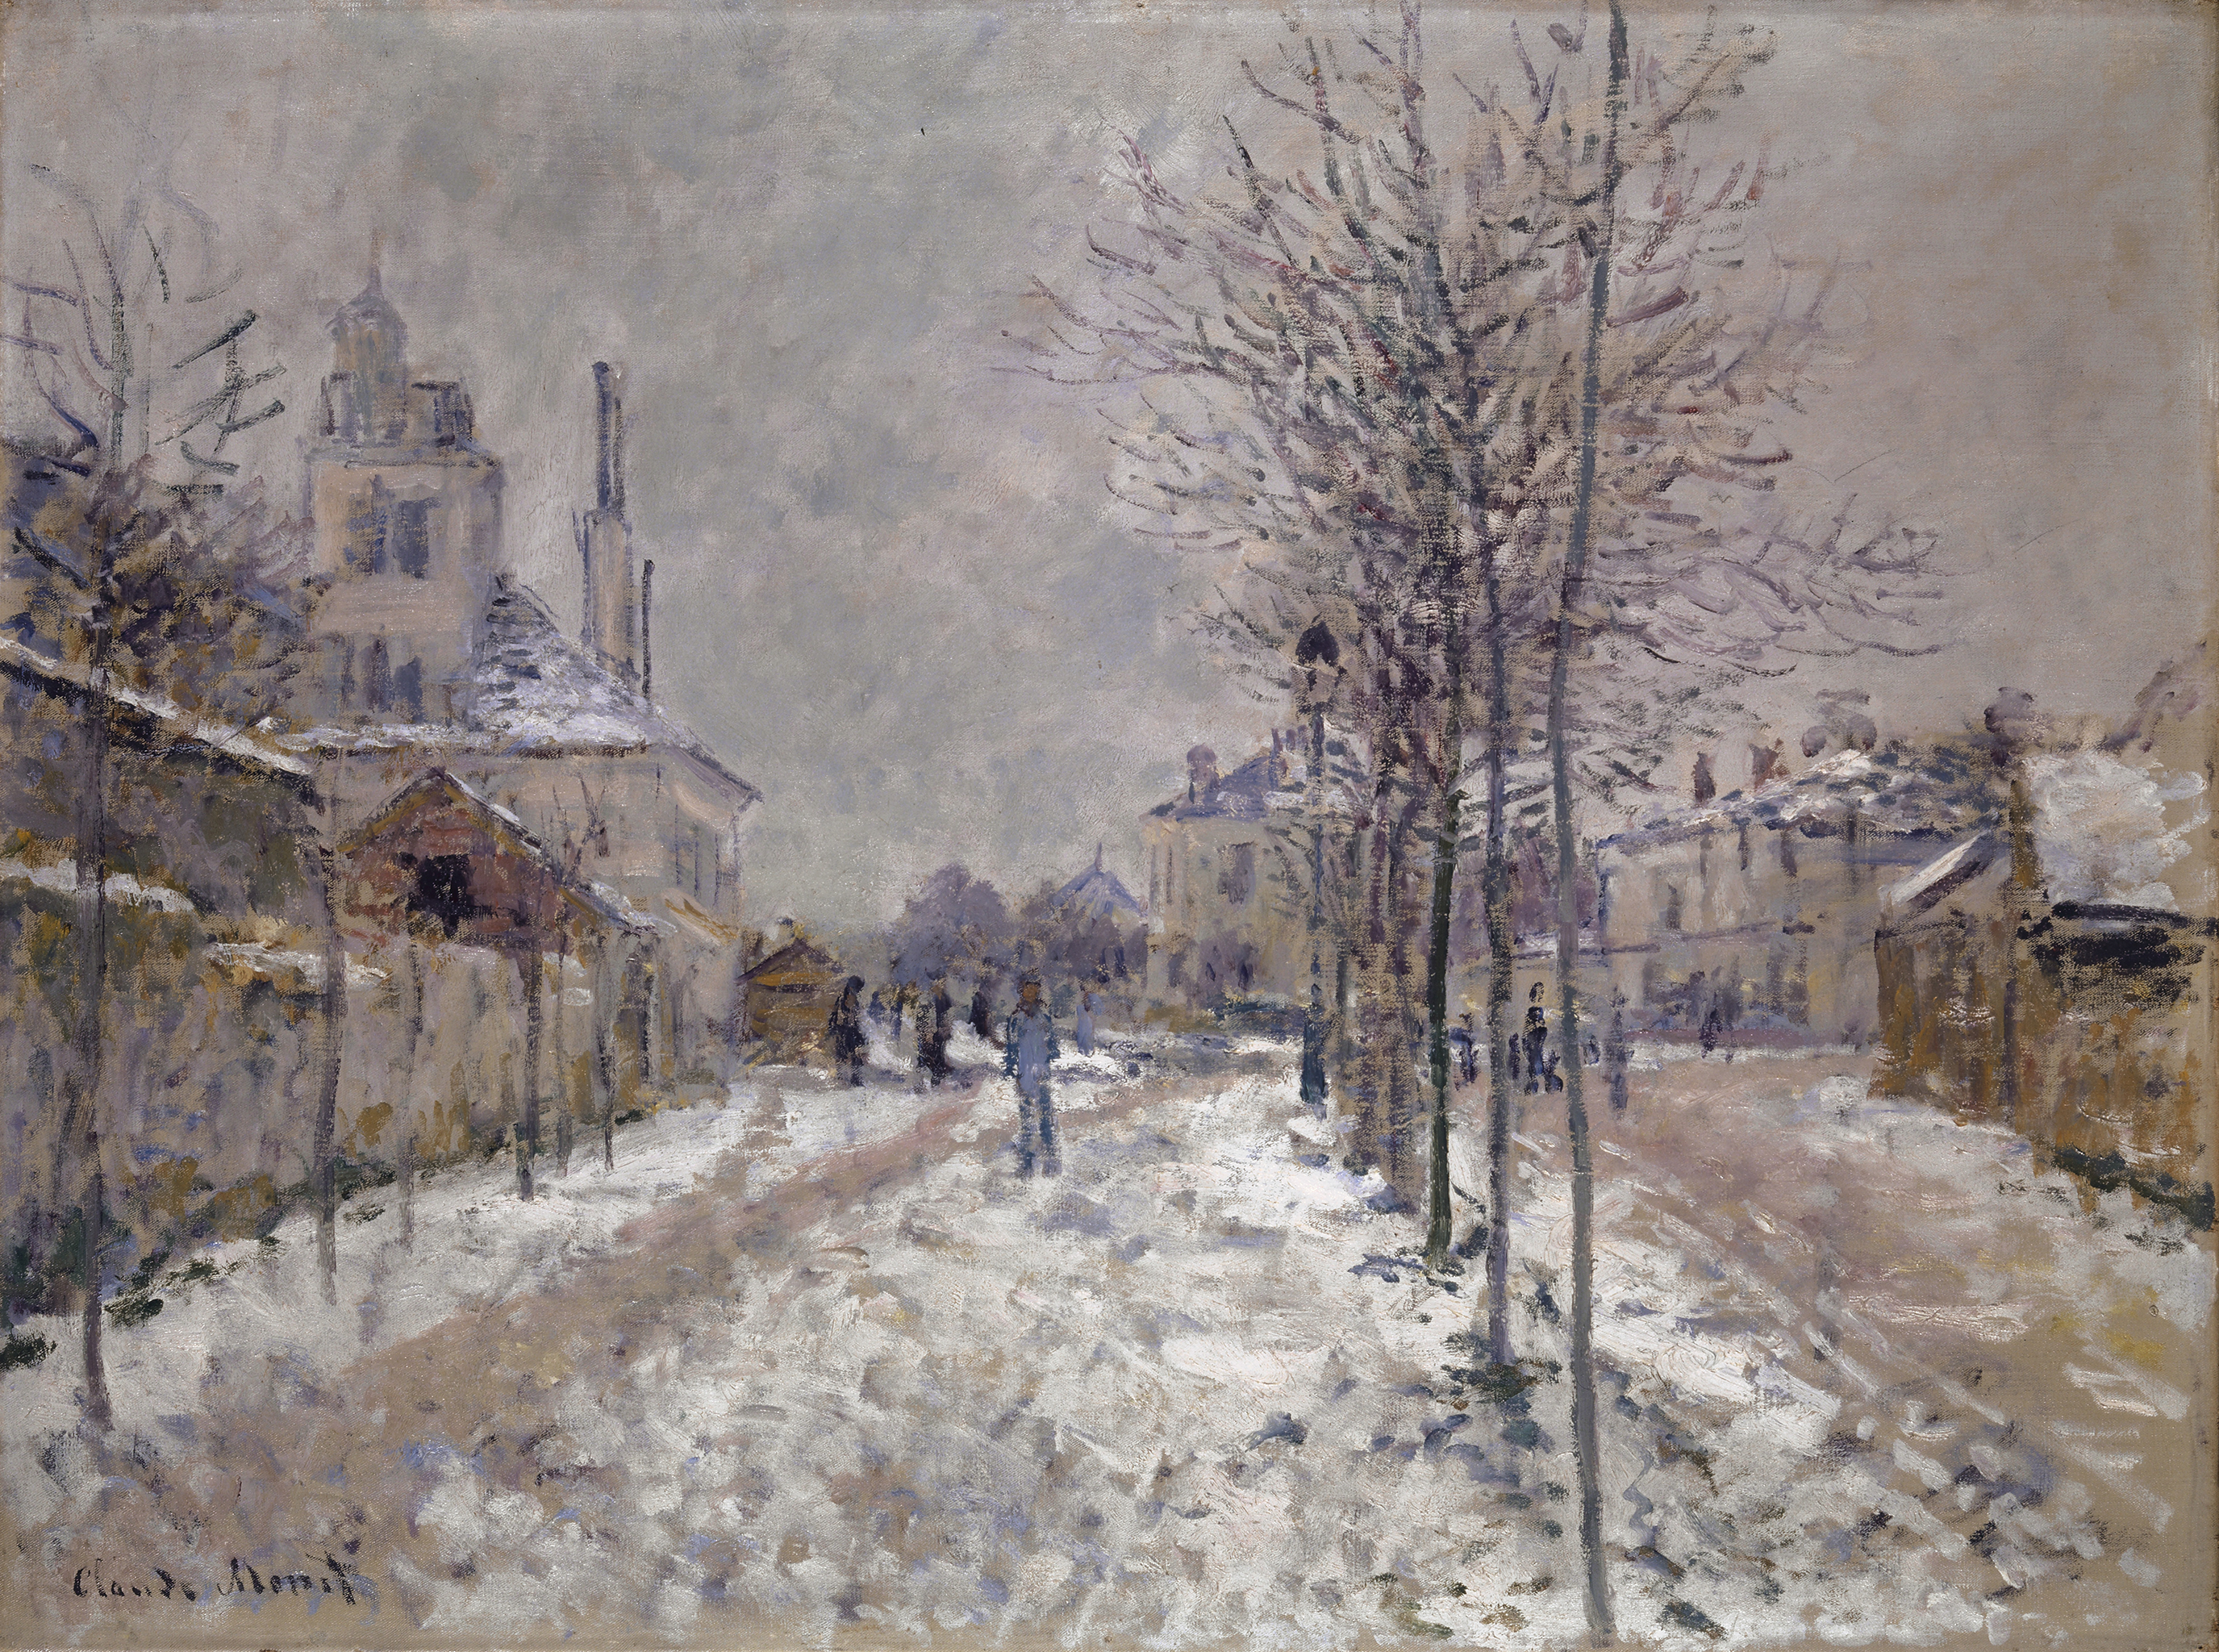 A painting of a road covered in snow which cuts through a town. Along it, people walk, and thin leafless trees stand. To the right and left of it are a series of buildings and homes. The sky is a cloudy and gray.